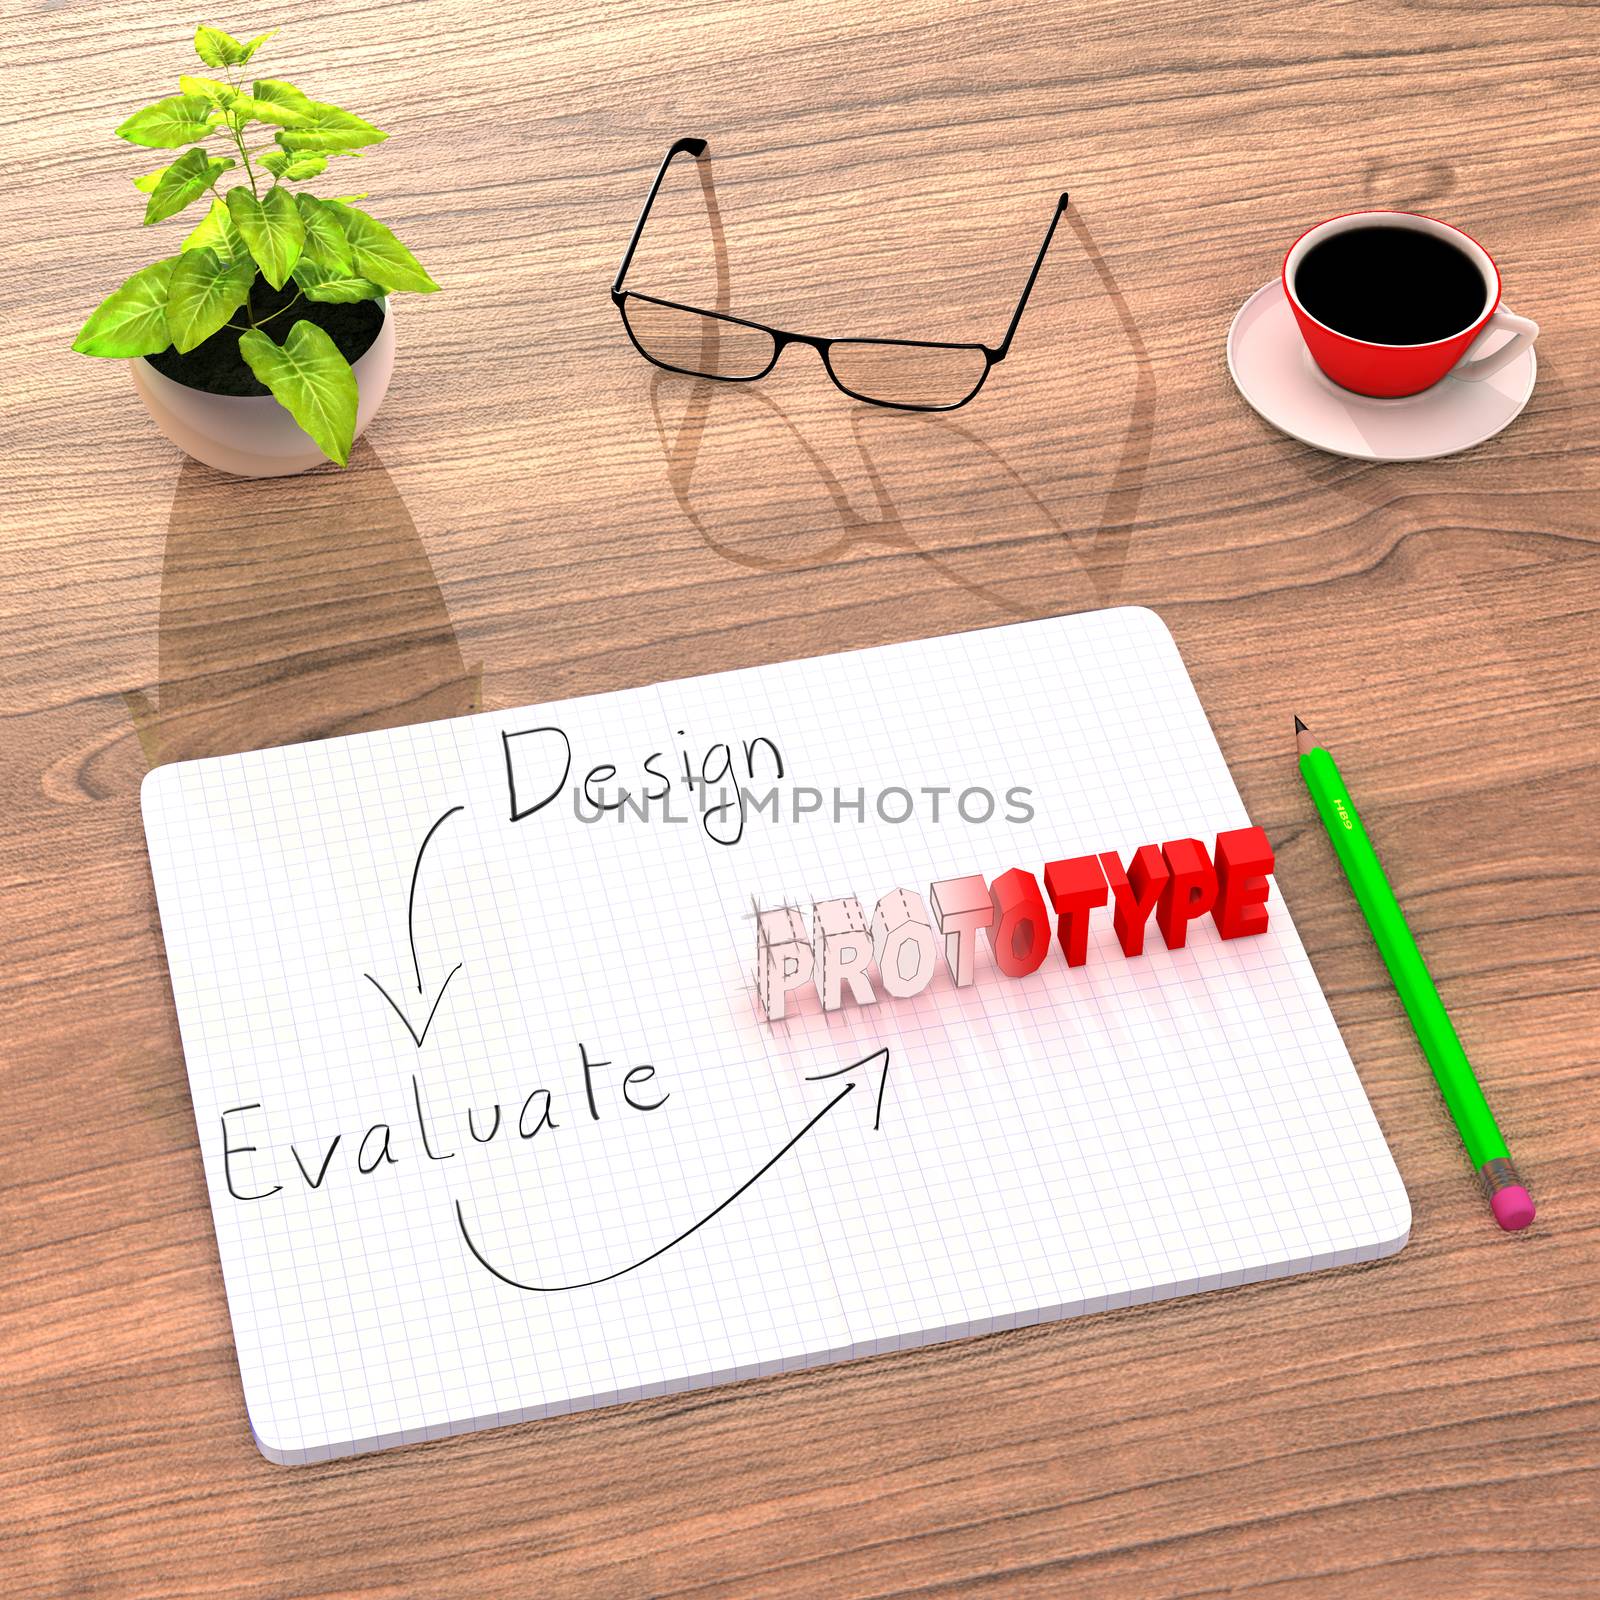 This illustration shows a comfortable desk (plant, coffee) used to work on a new product. After designing and evaluating, the sketch takes a real prototype form. 3D Render.